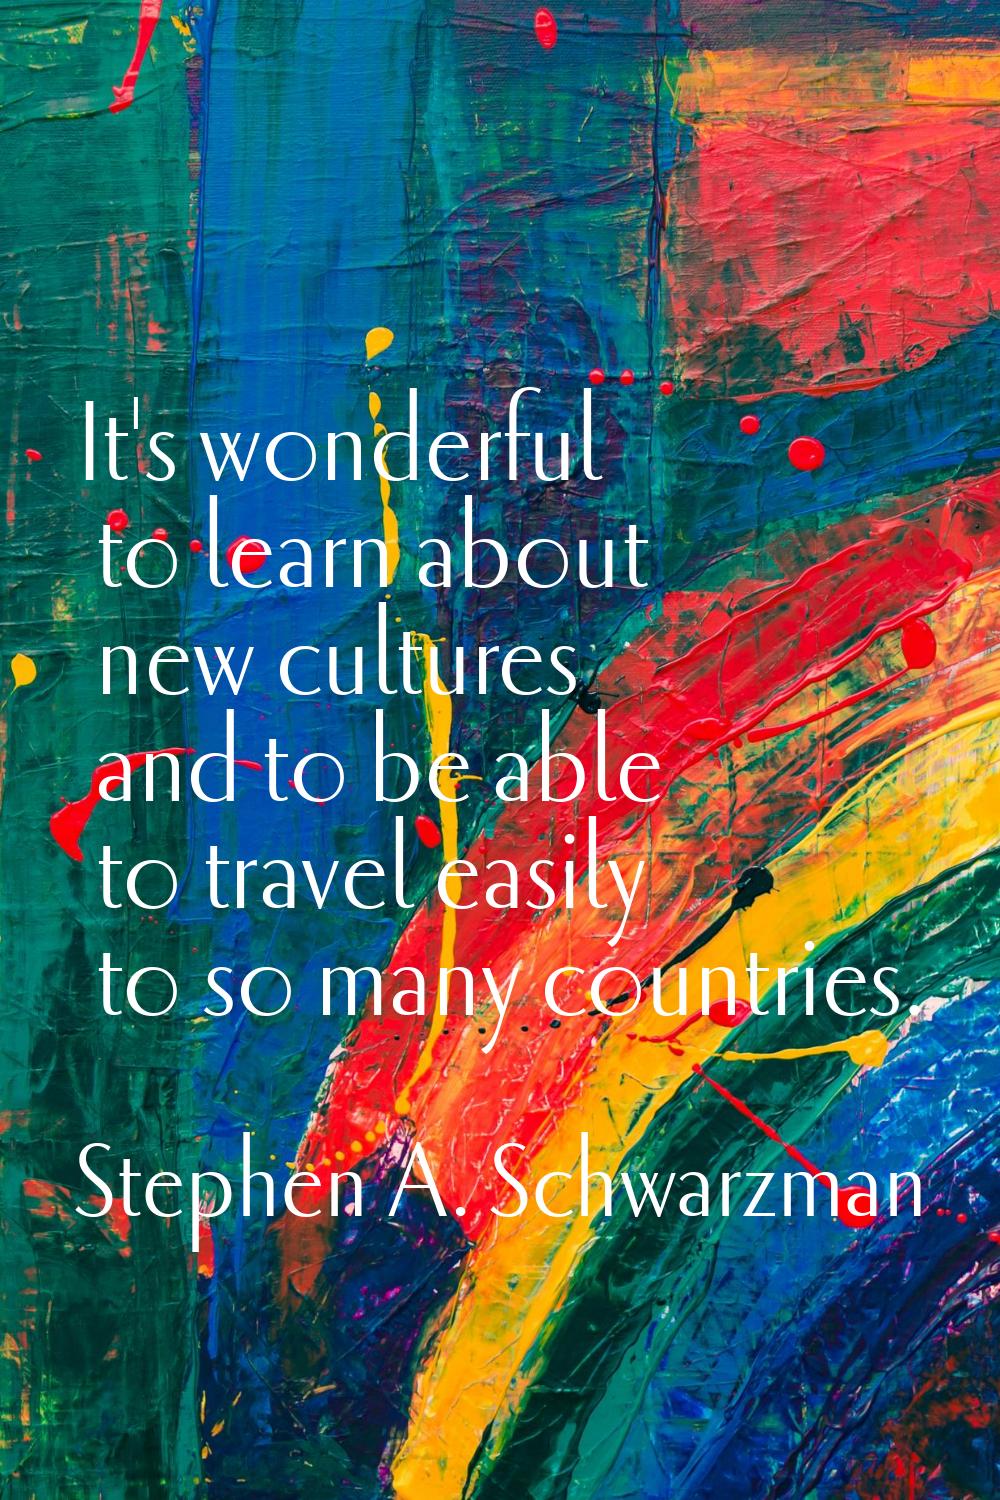 It's wonderful to learn about new cultures and to be able to travel easily to so many countries.